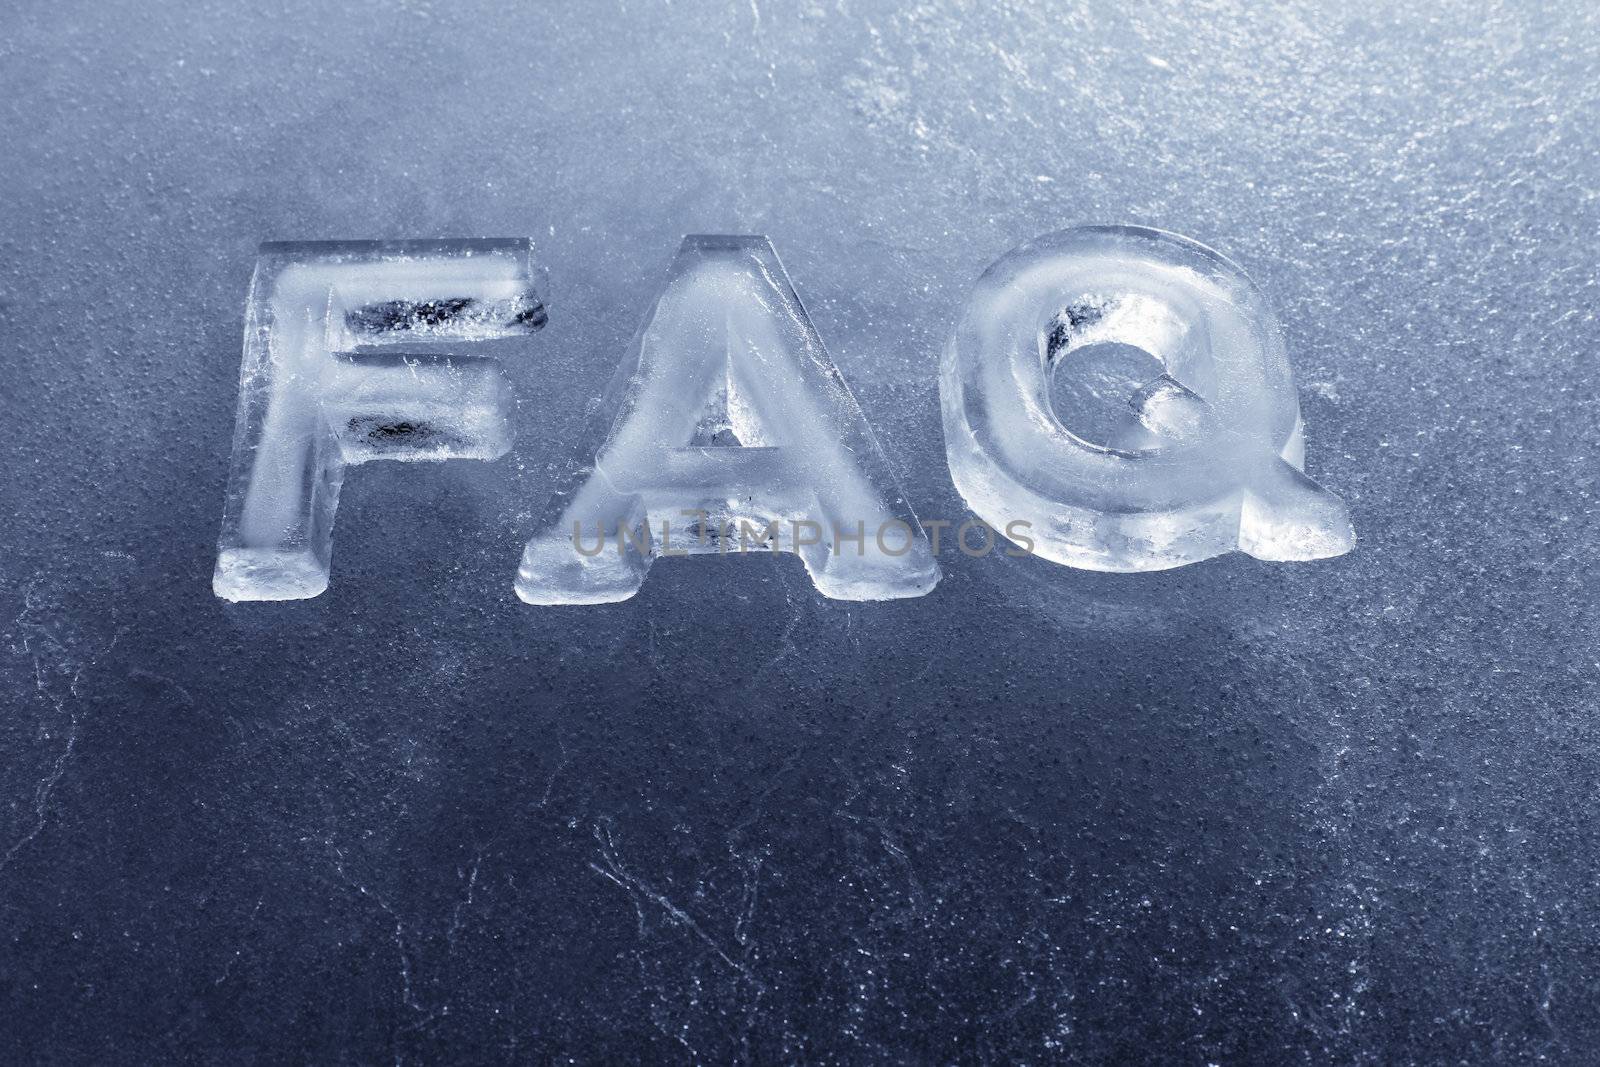 Abbreviation FAQ (Frequently Asked Questions) made of real ice letters.